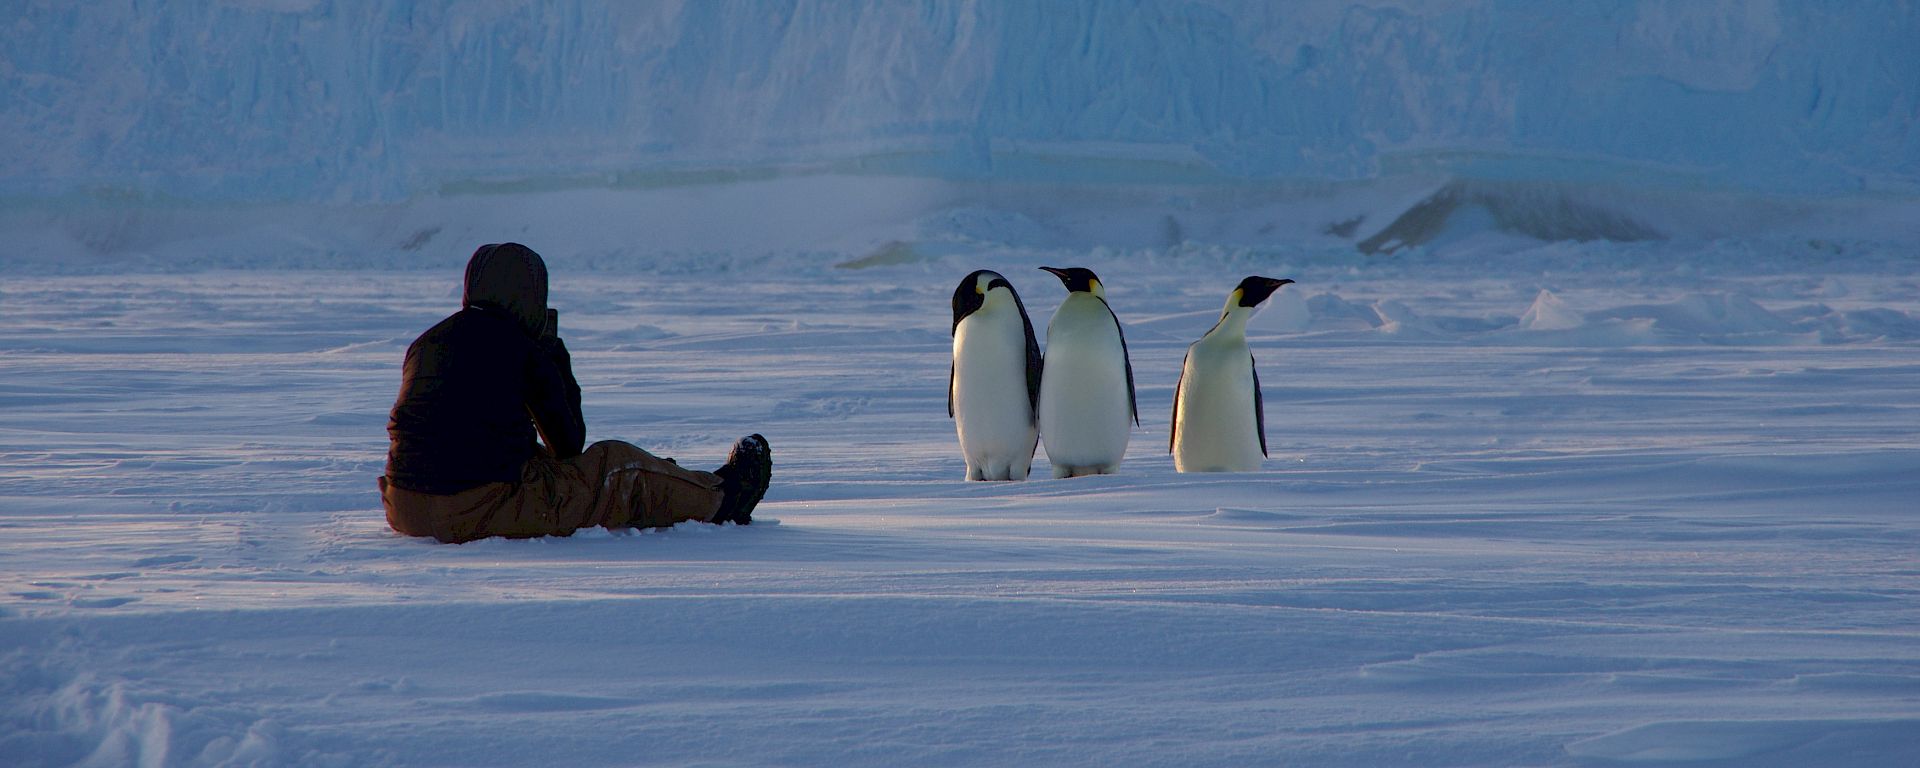 Expeditioner sitting on the sea ice observing three emperor penguins. Grounded iceberg close behind